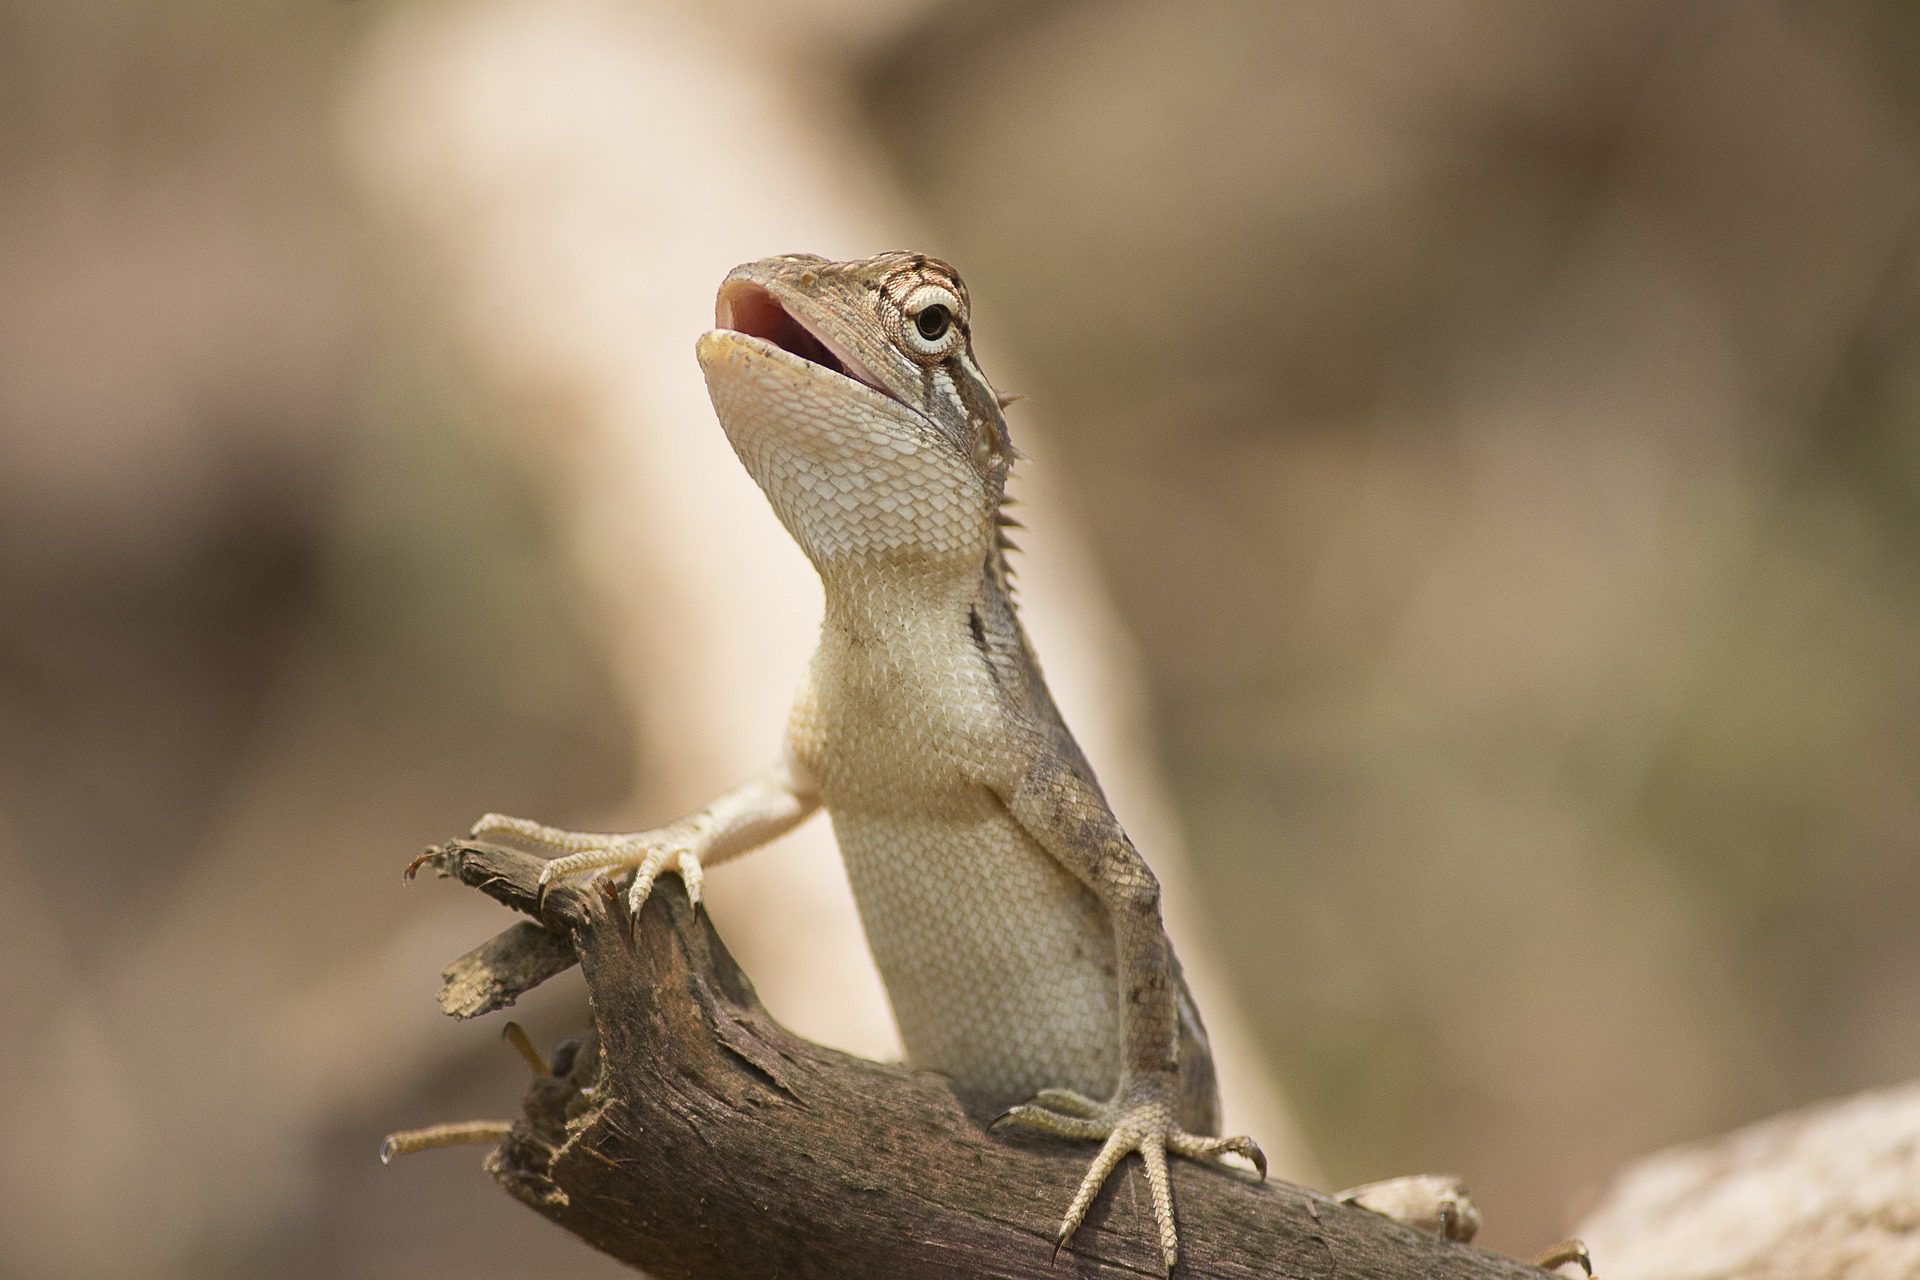 Aging before birth: how it works in lizards